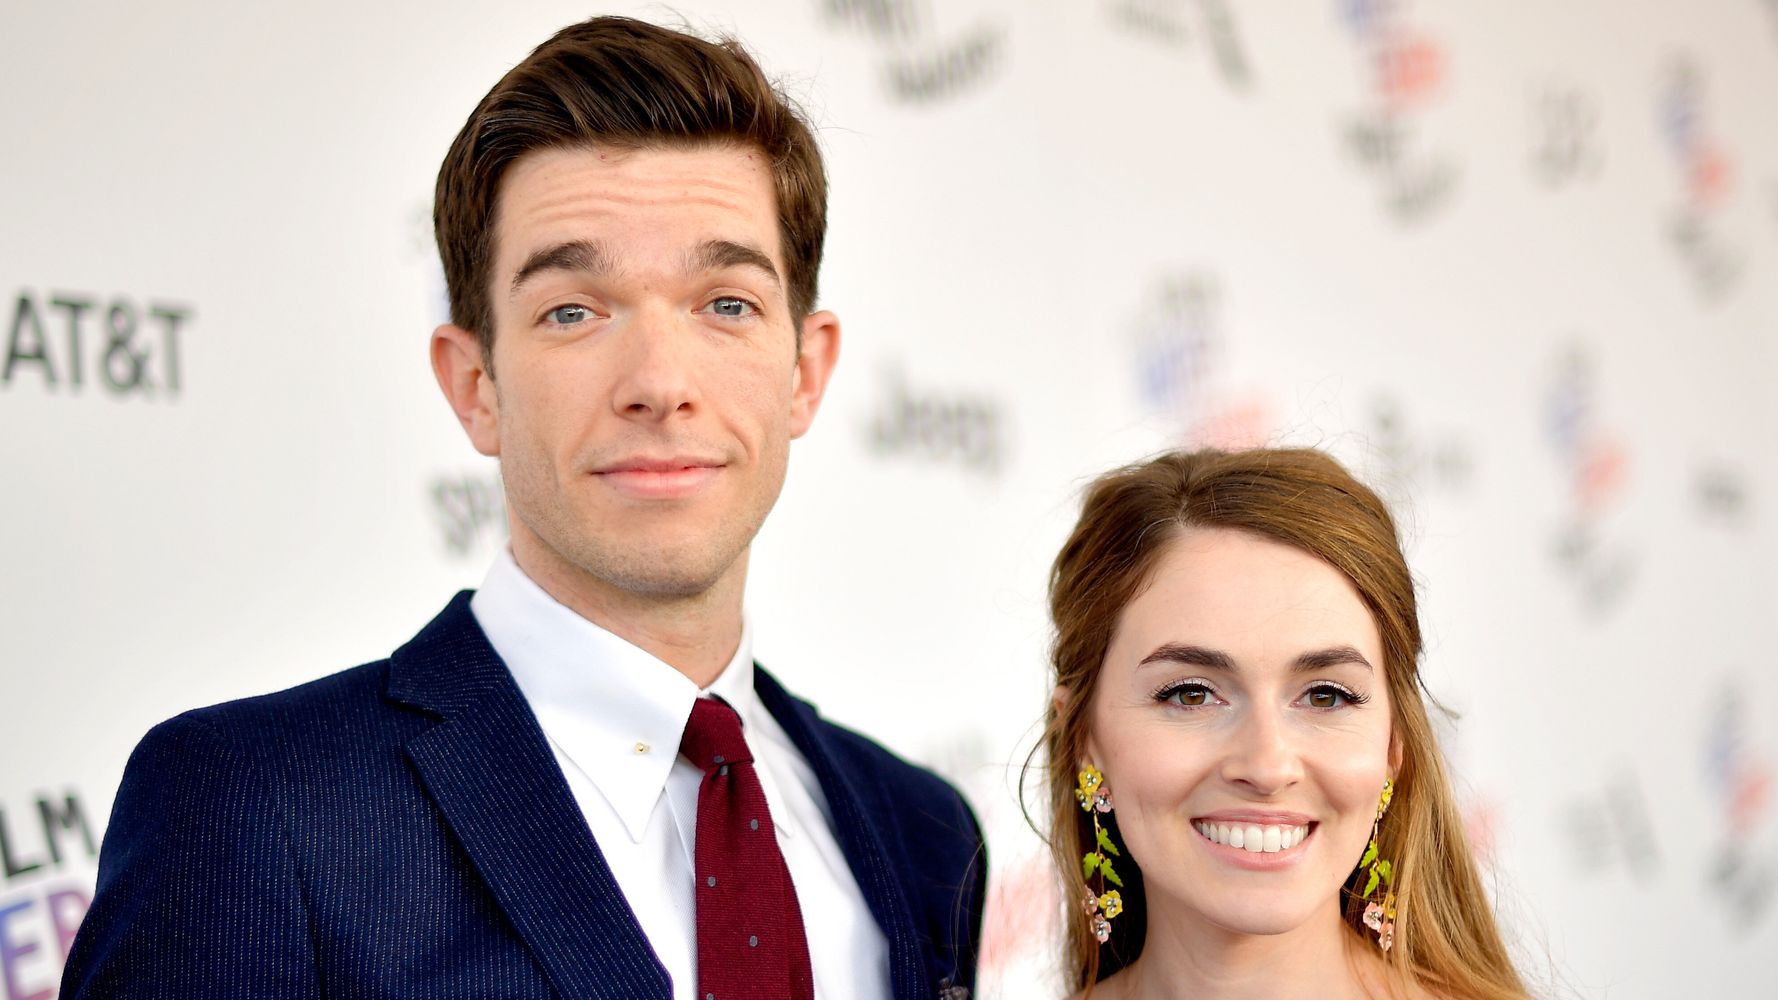 John Mulaney And Anna Marie Tendler Are Divorcing After 6 Years Together.